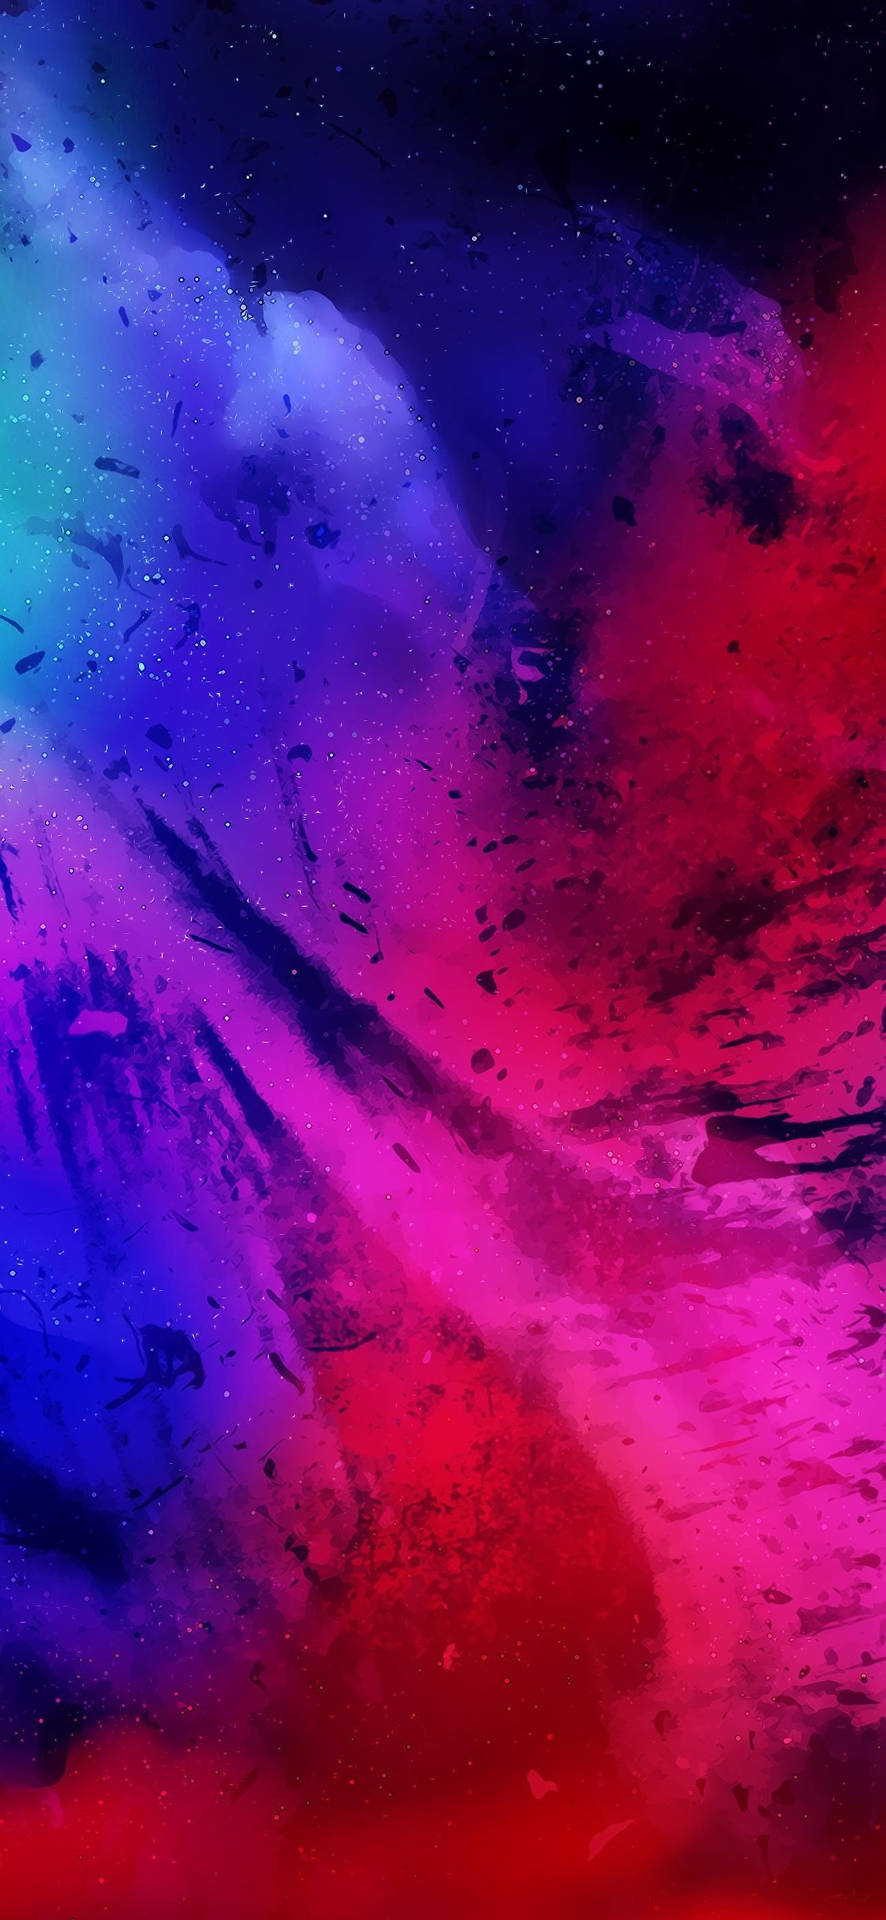 Iphone 12 Pro Max Blue And Red Wallpaper